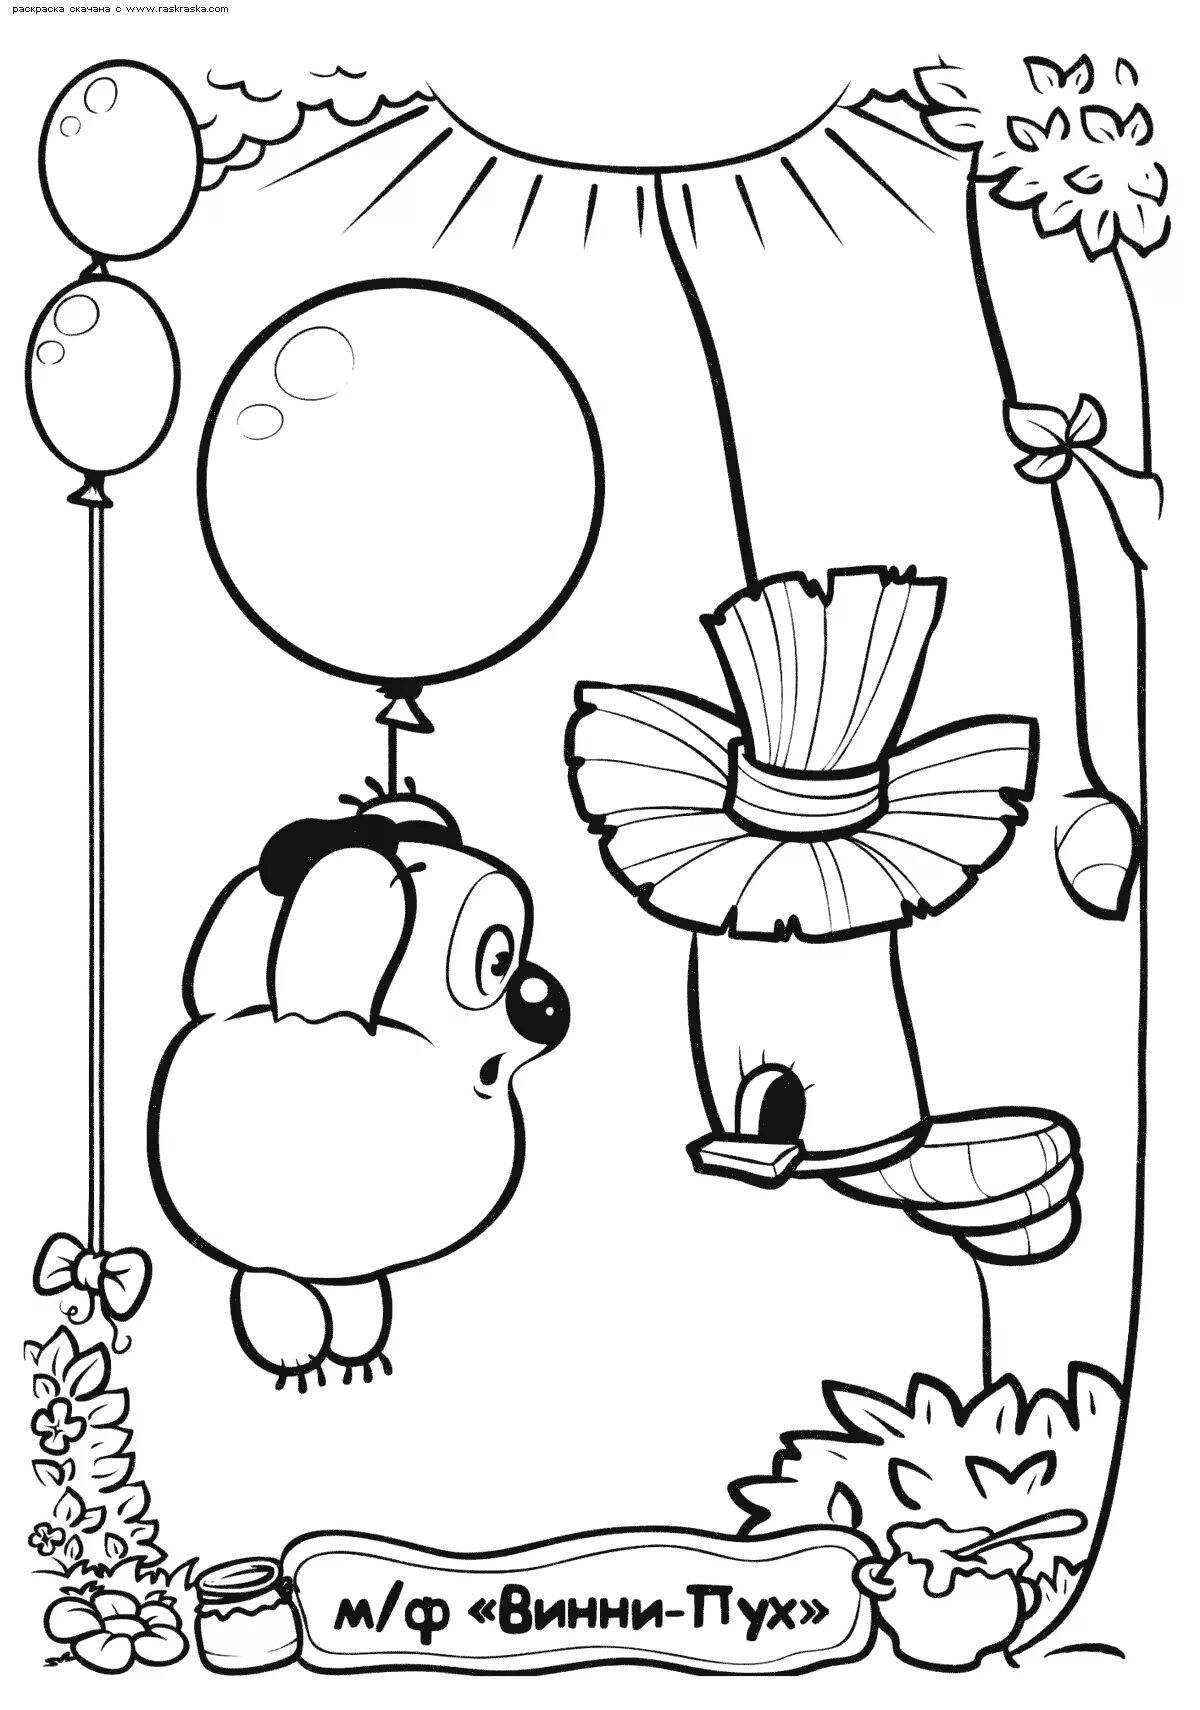 Live winnie the pooh with a balloon